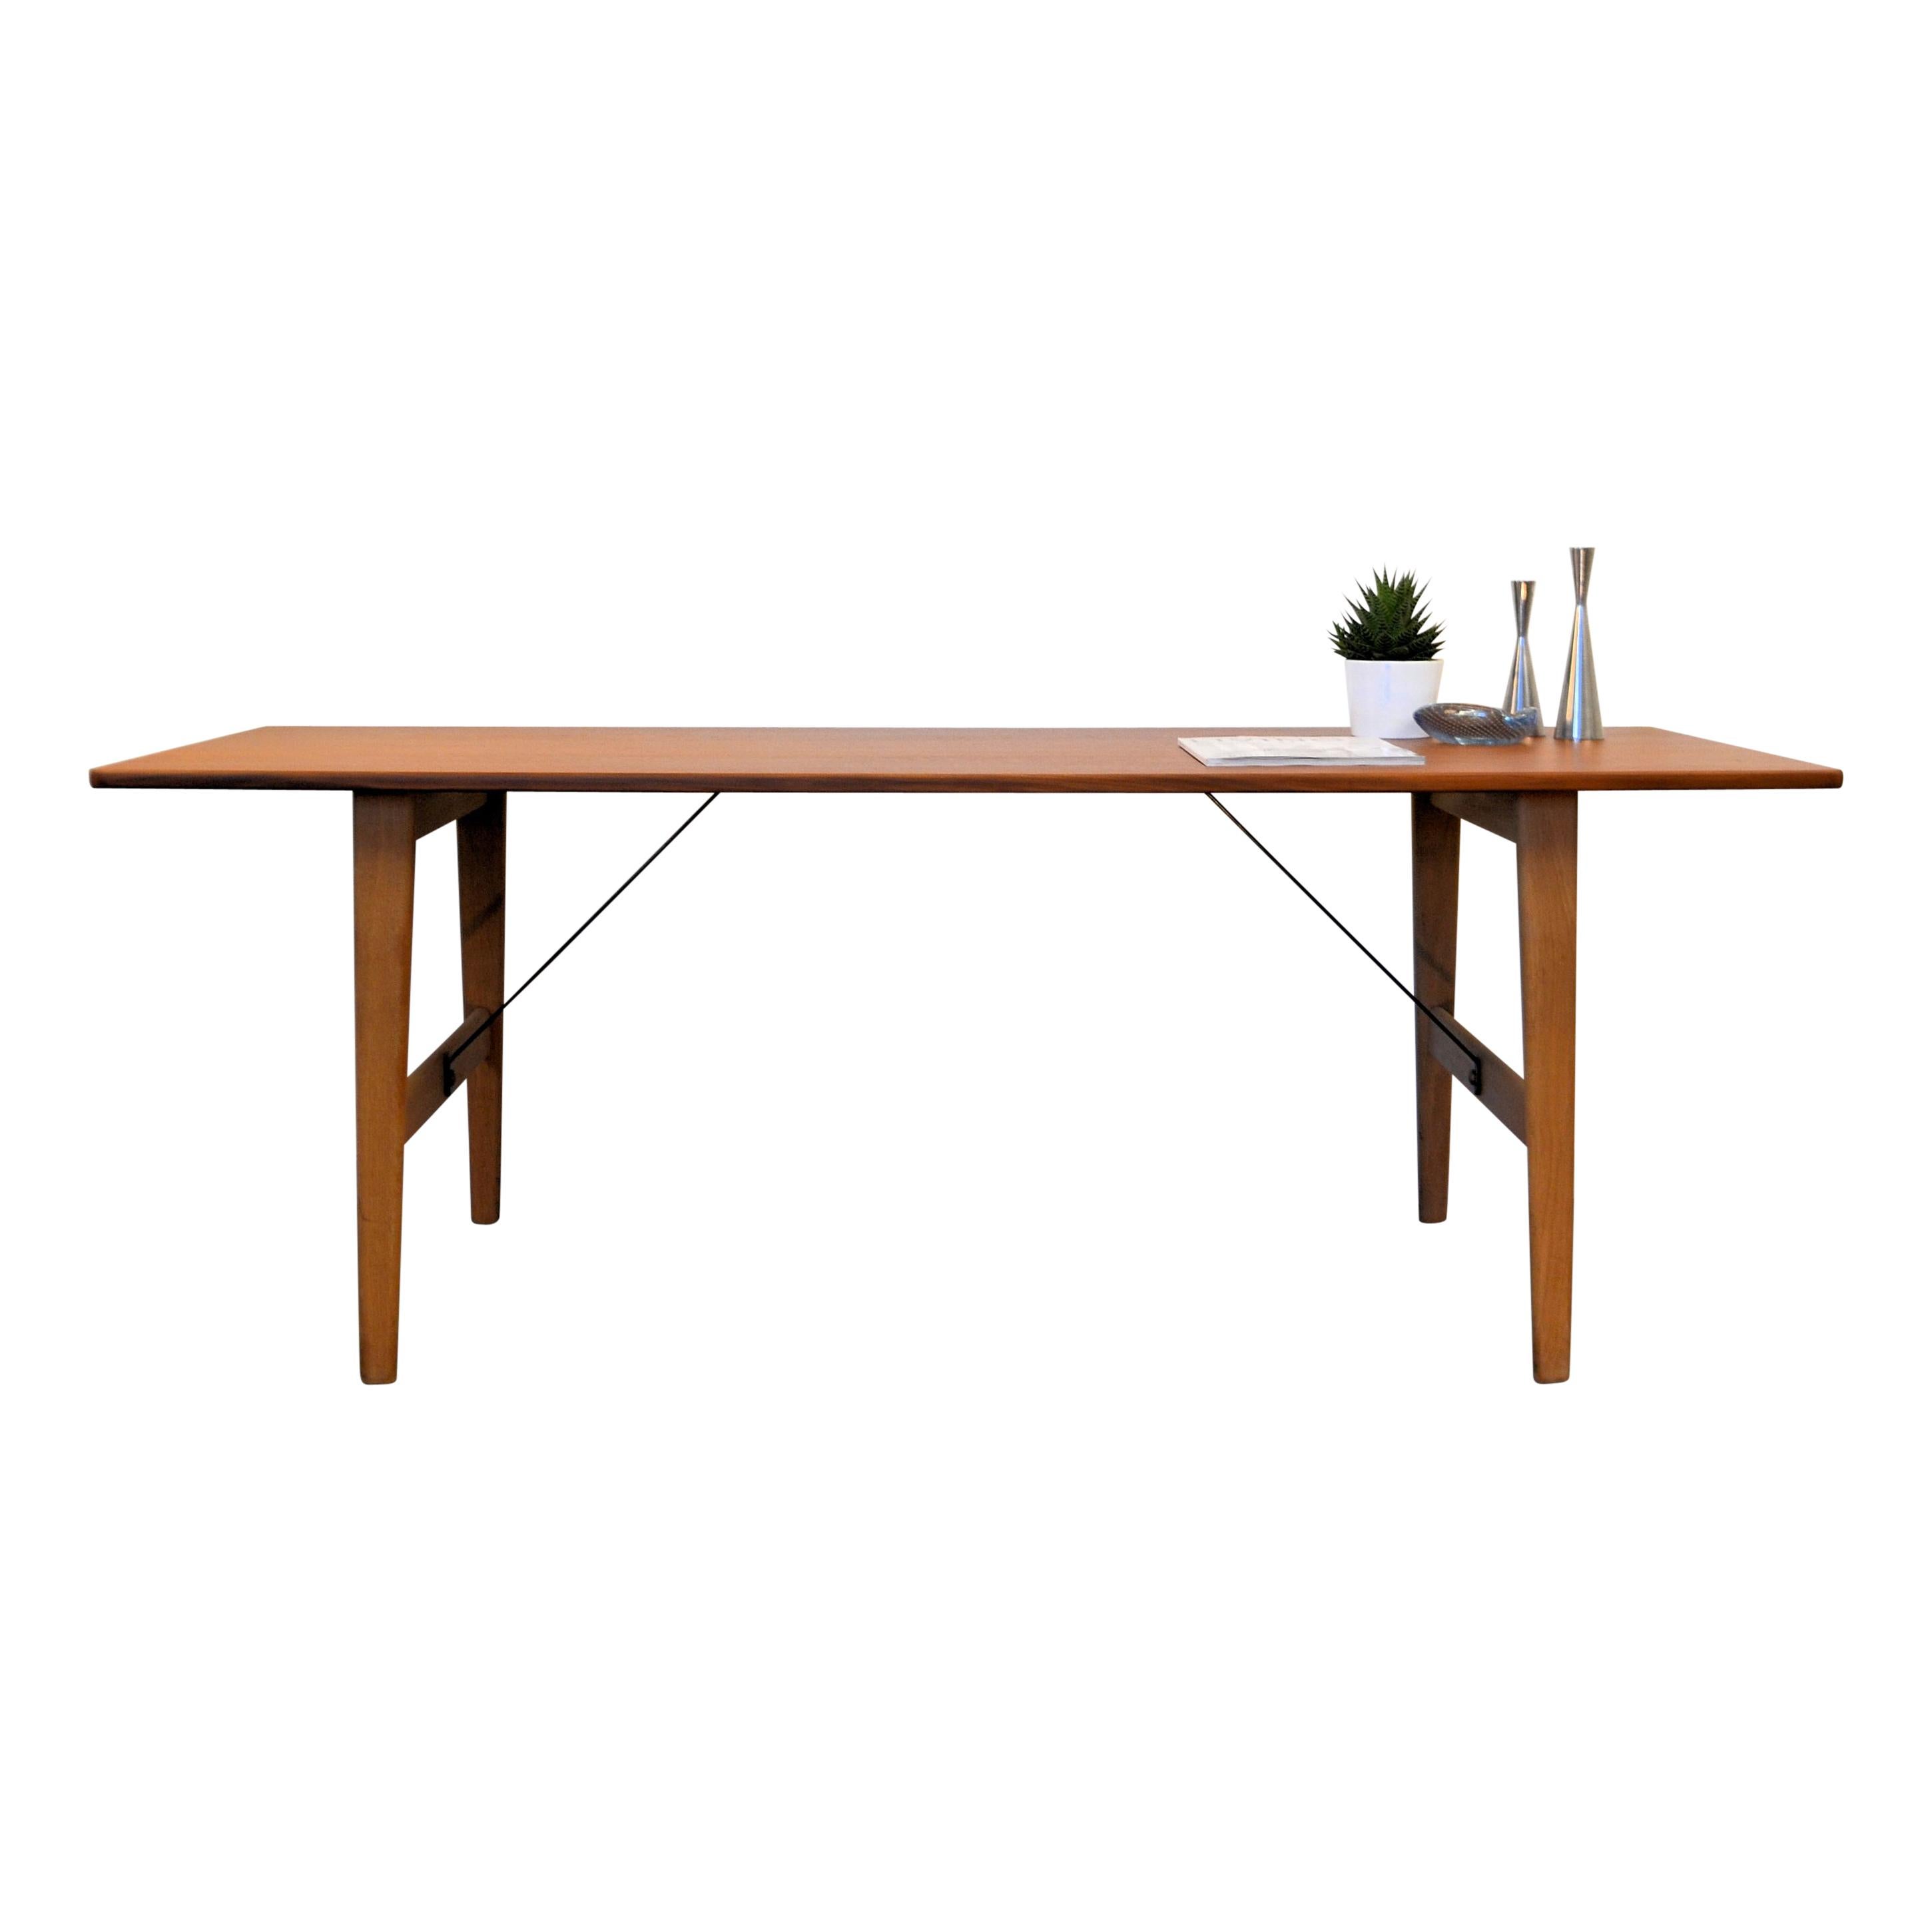 Mid-Century Modern Danish design low dining/louge table or desk, designed by Børge Mogensen for Fredericia in 1956. This beautiful table/desk has a teak top and a solid oak frame. This table is the low version of the so called 